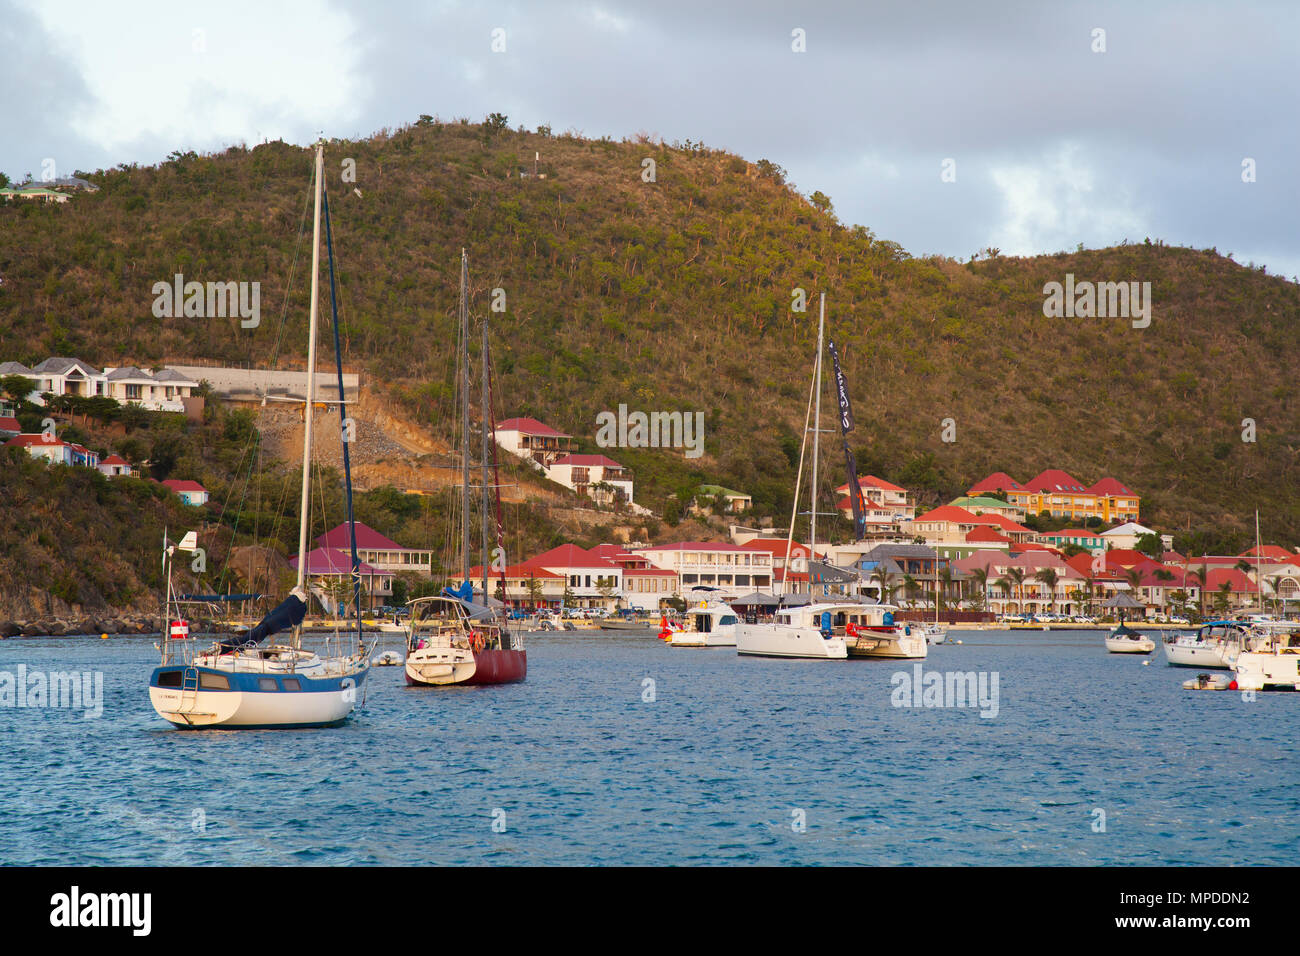 Baie de Gustavia, Saint Barthelemy, St Barth's French Caribbean Island Banque D'Images